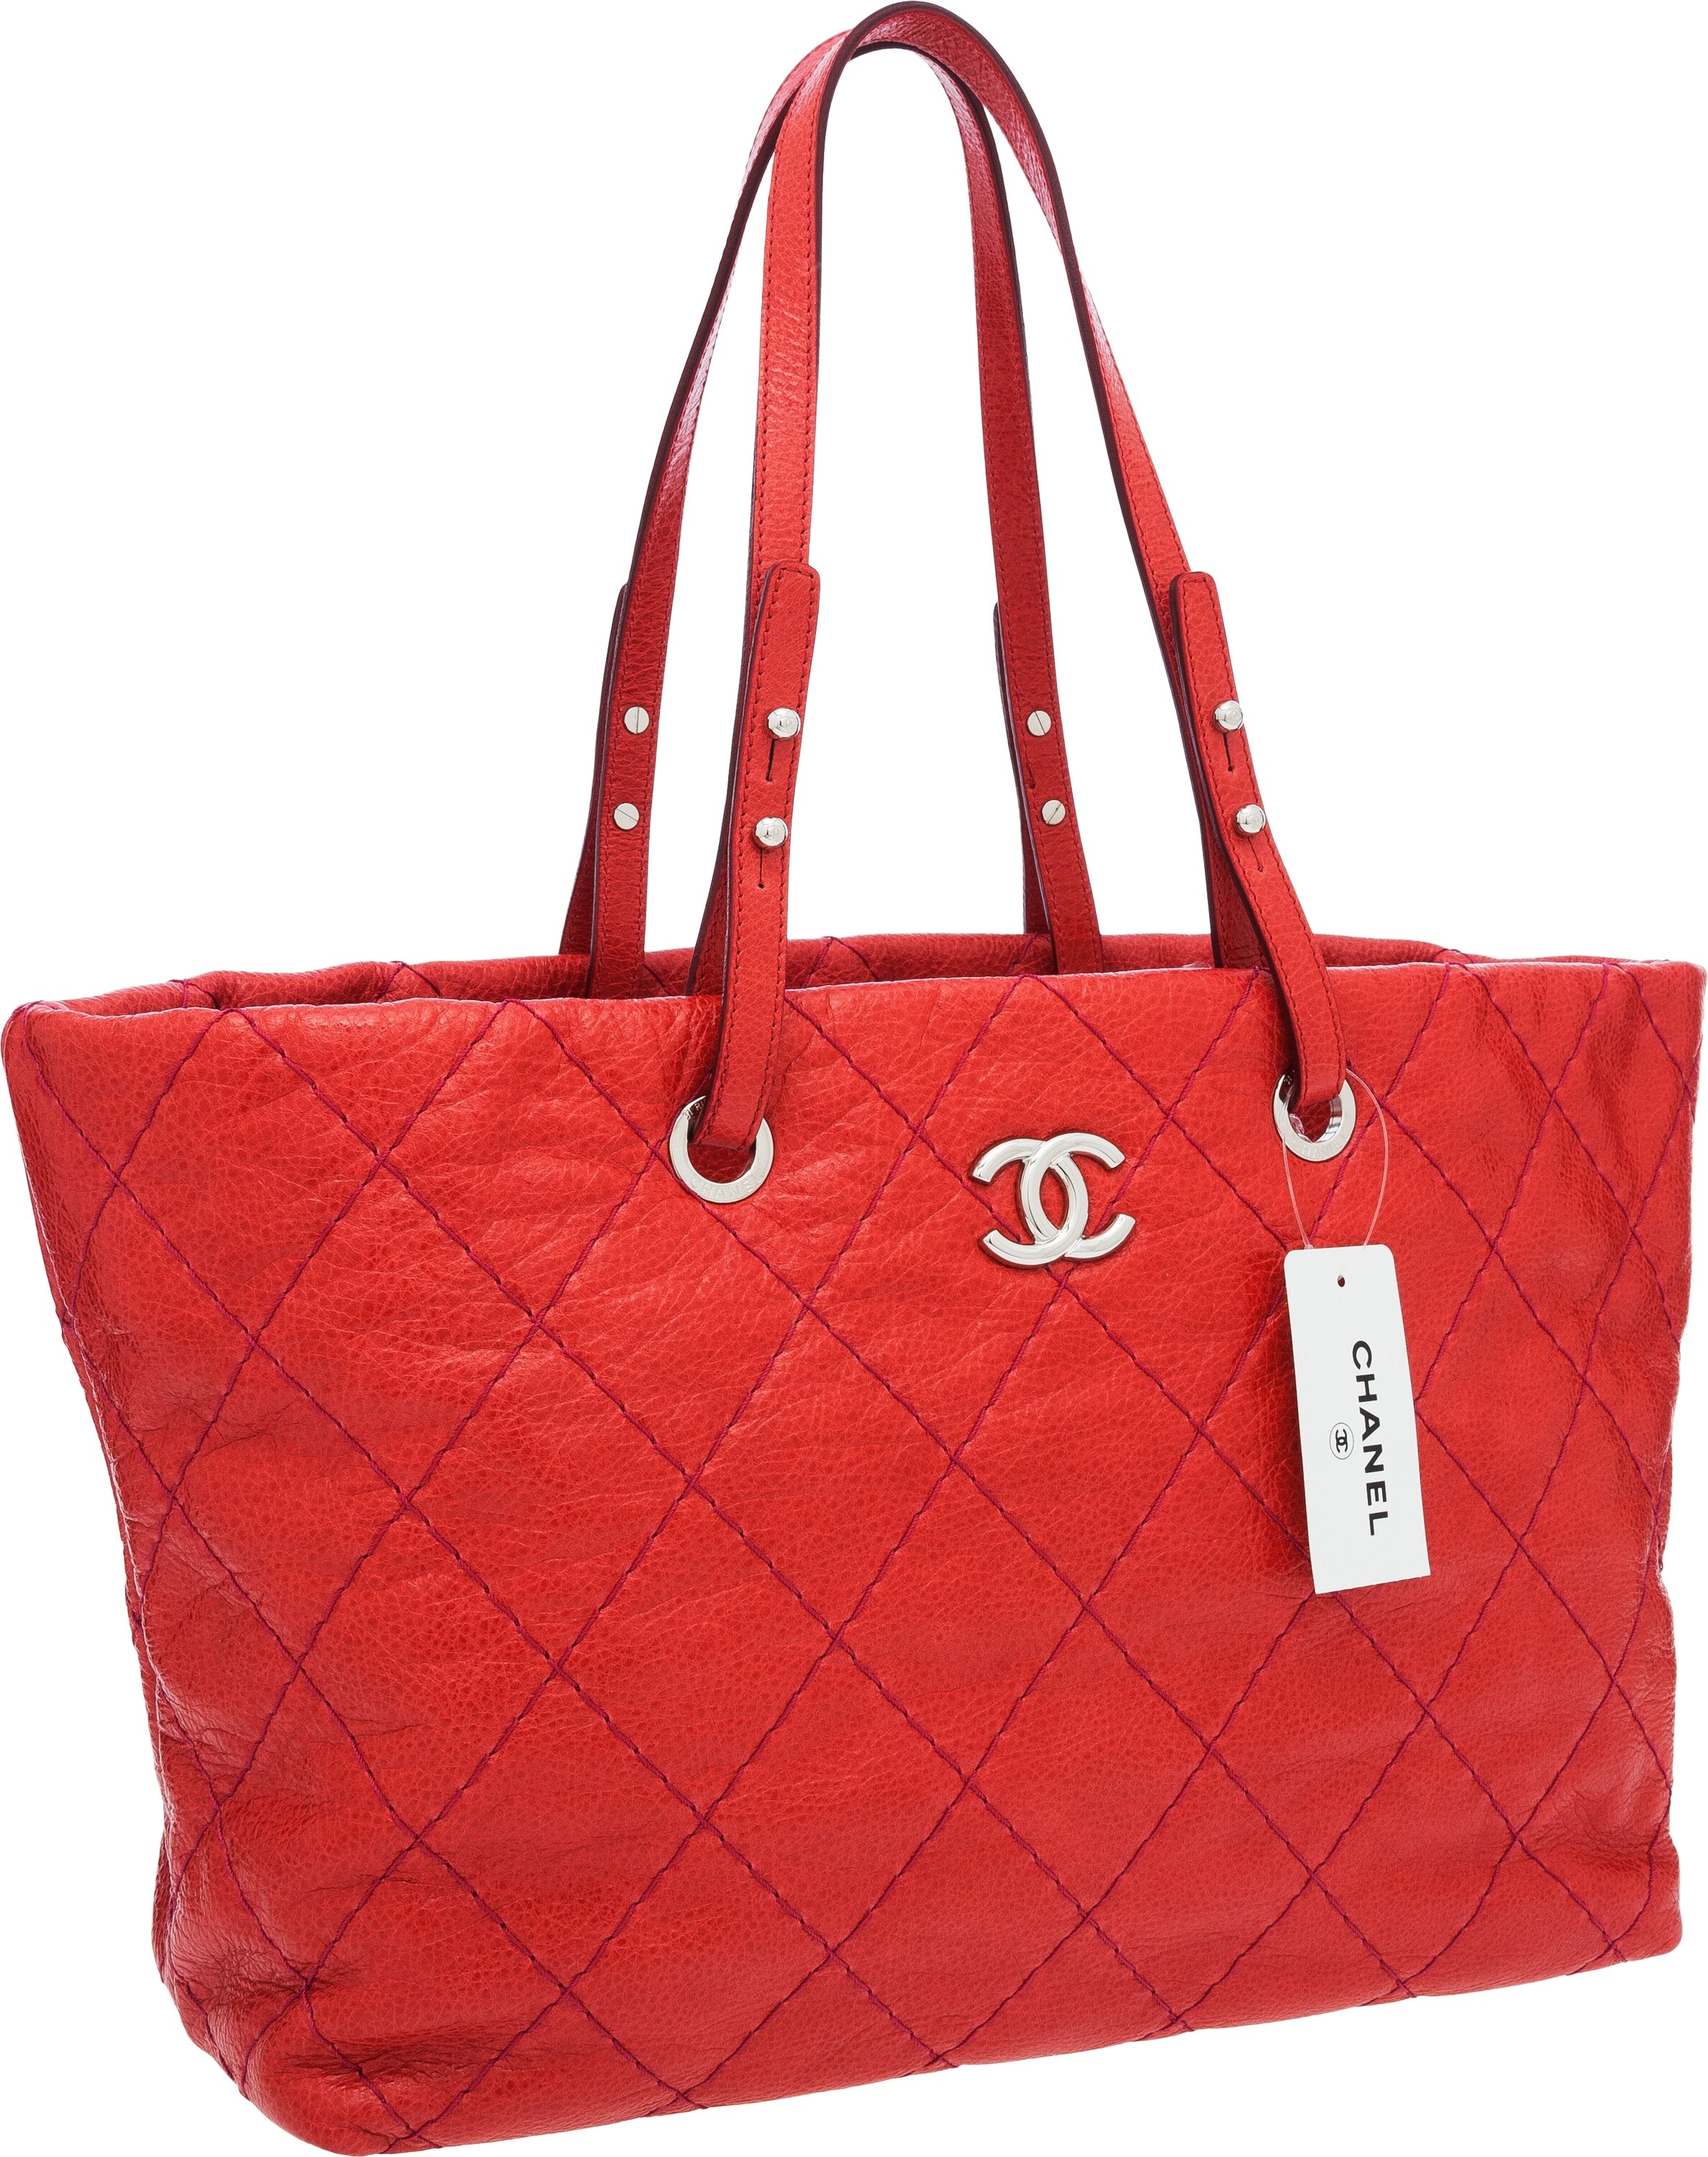 Chanel Red Quilted Caviar Leather Tote Bag with Silver Hardware